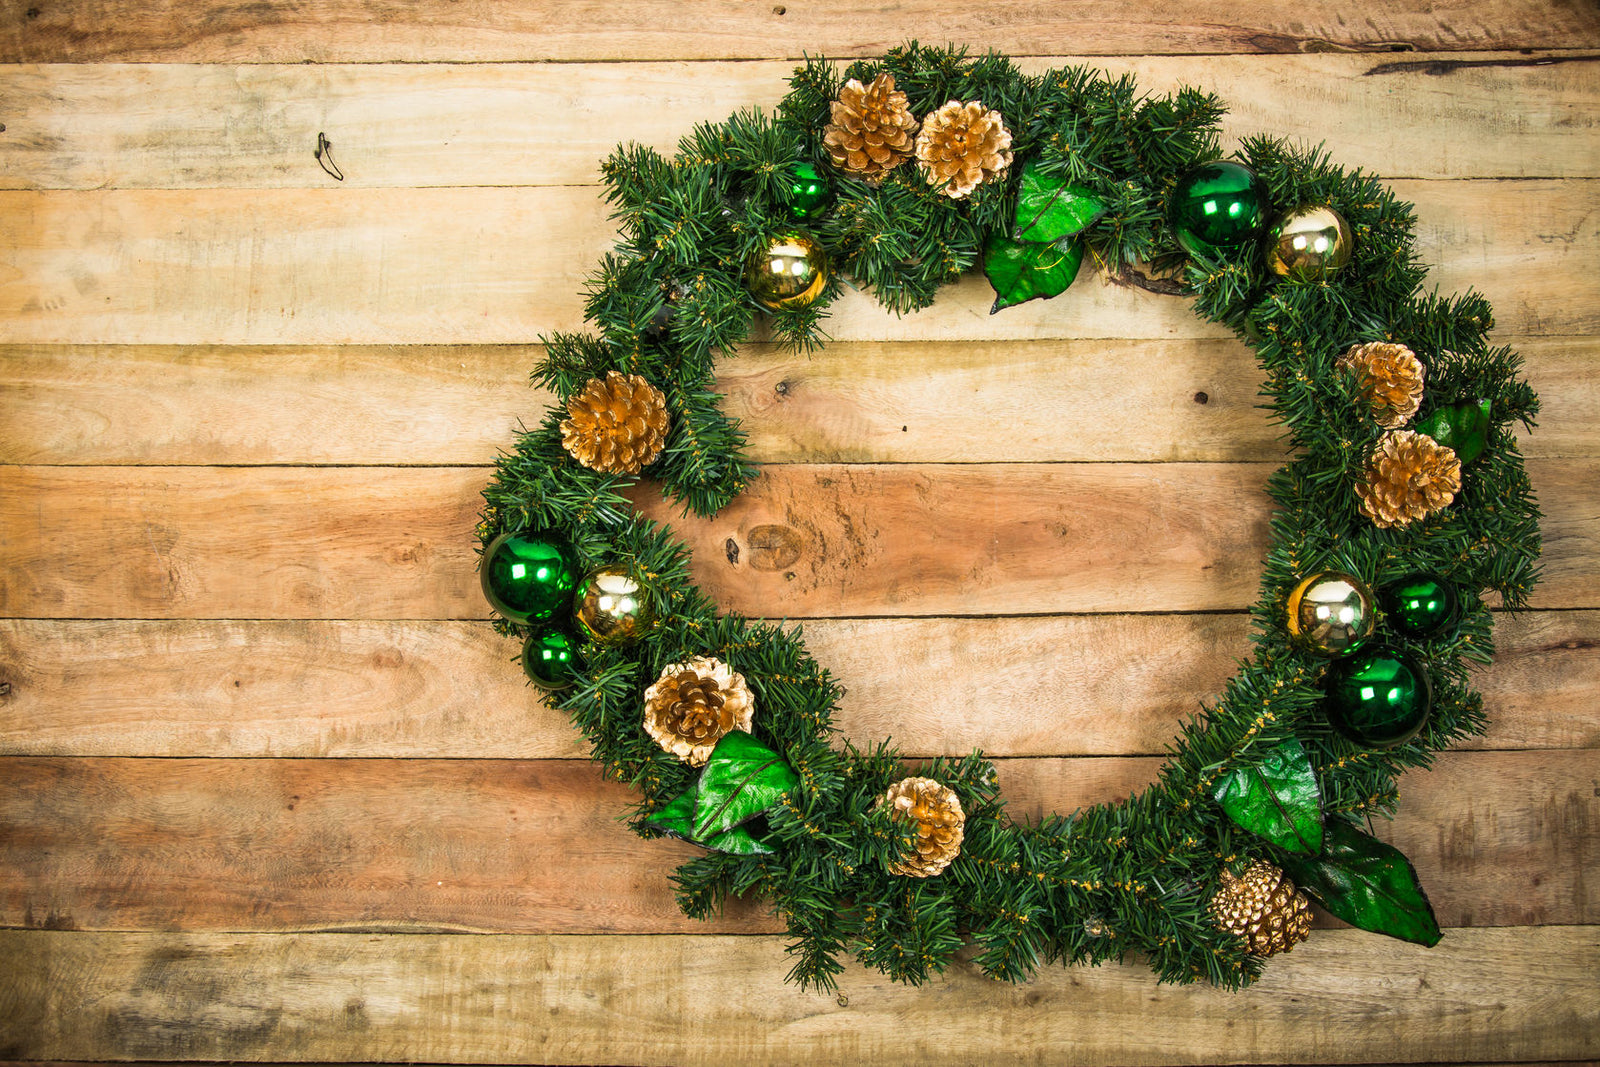 5 Christmas Decor Trends to Try This Season